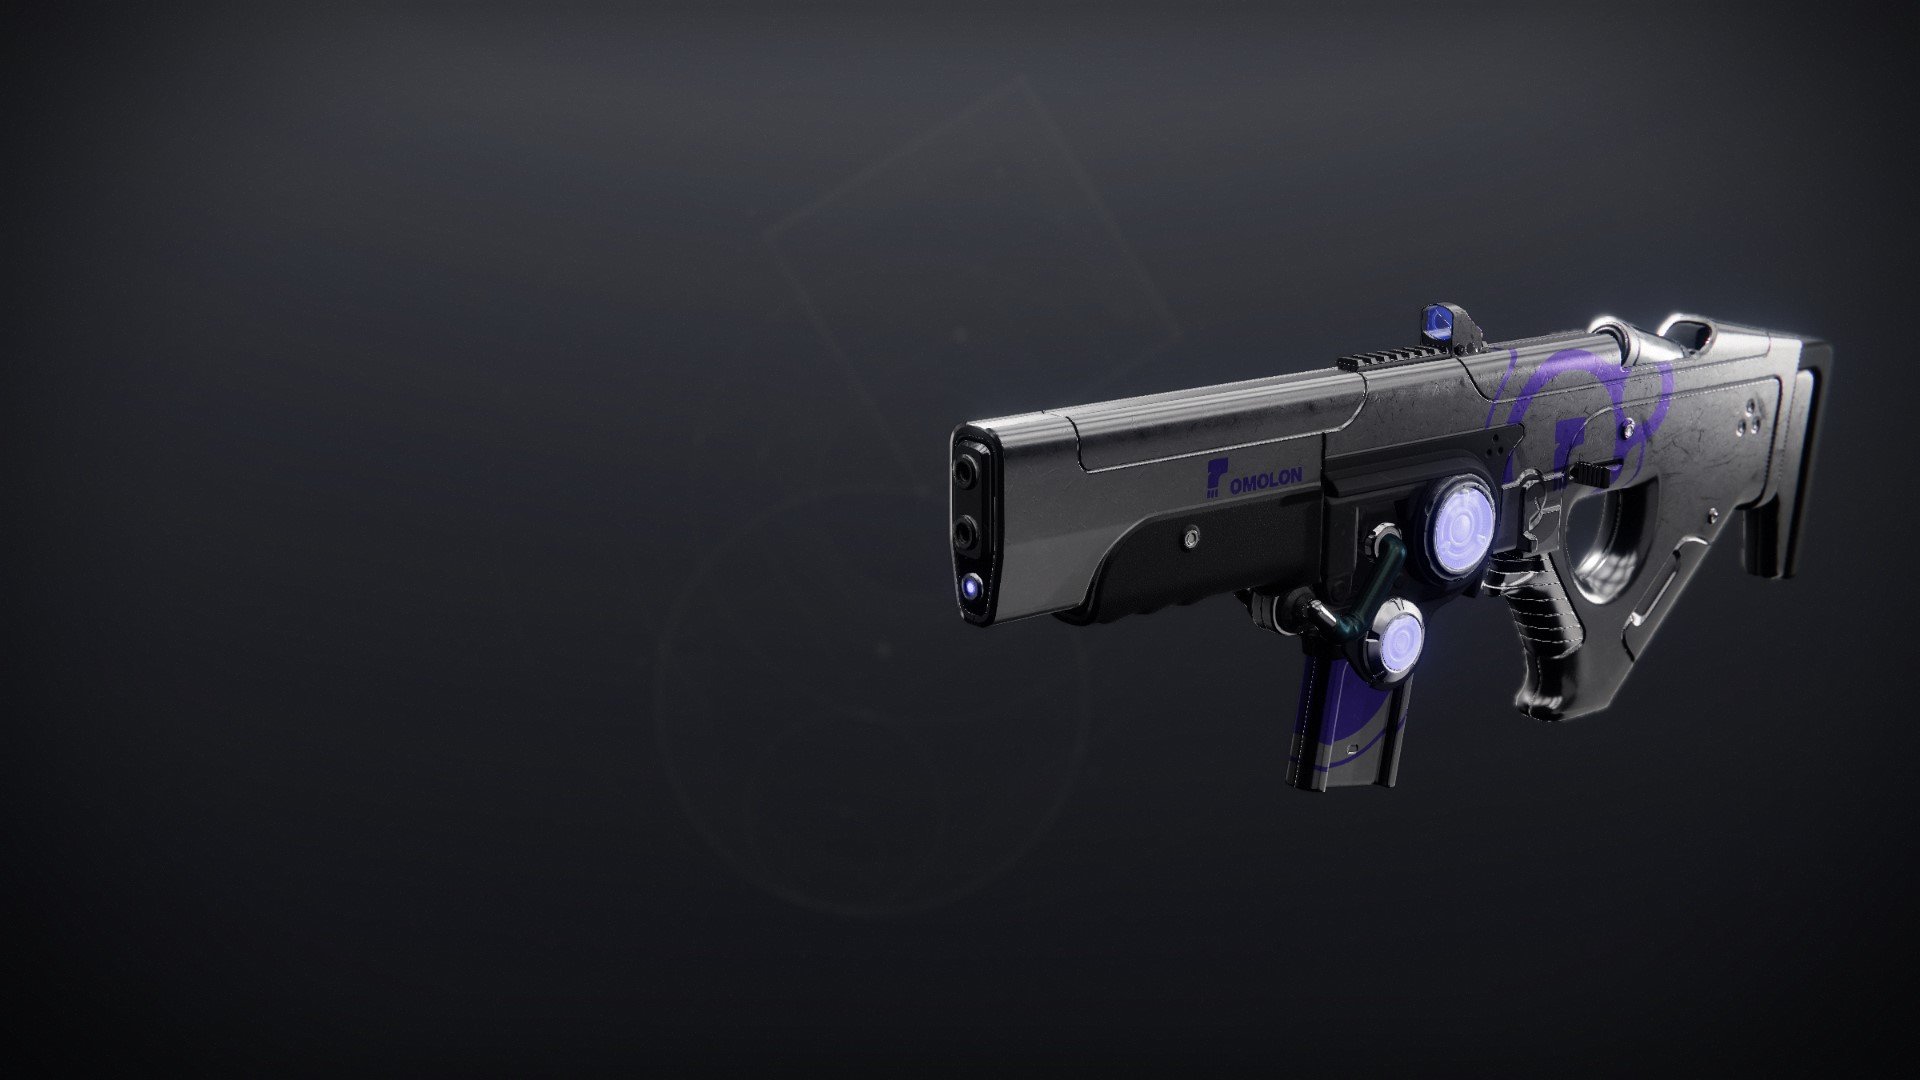 An in-game render of the Hung Jury SR4 (Adept).